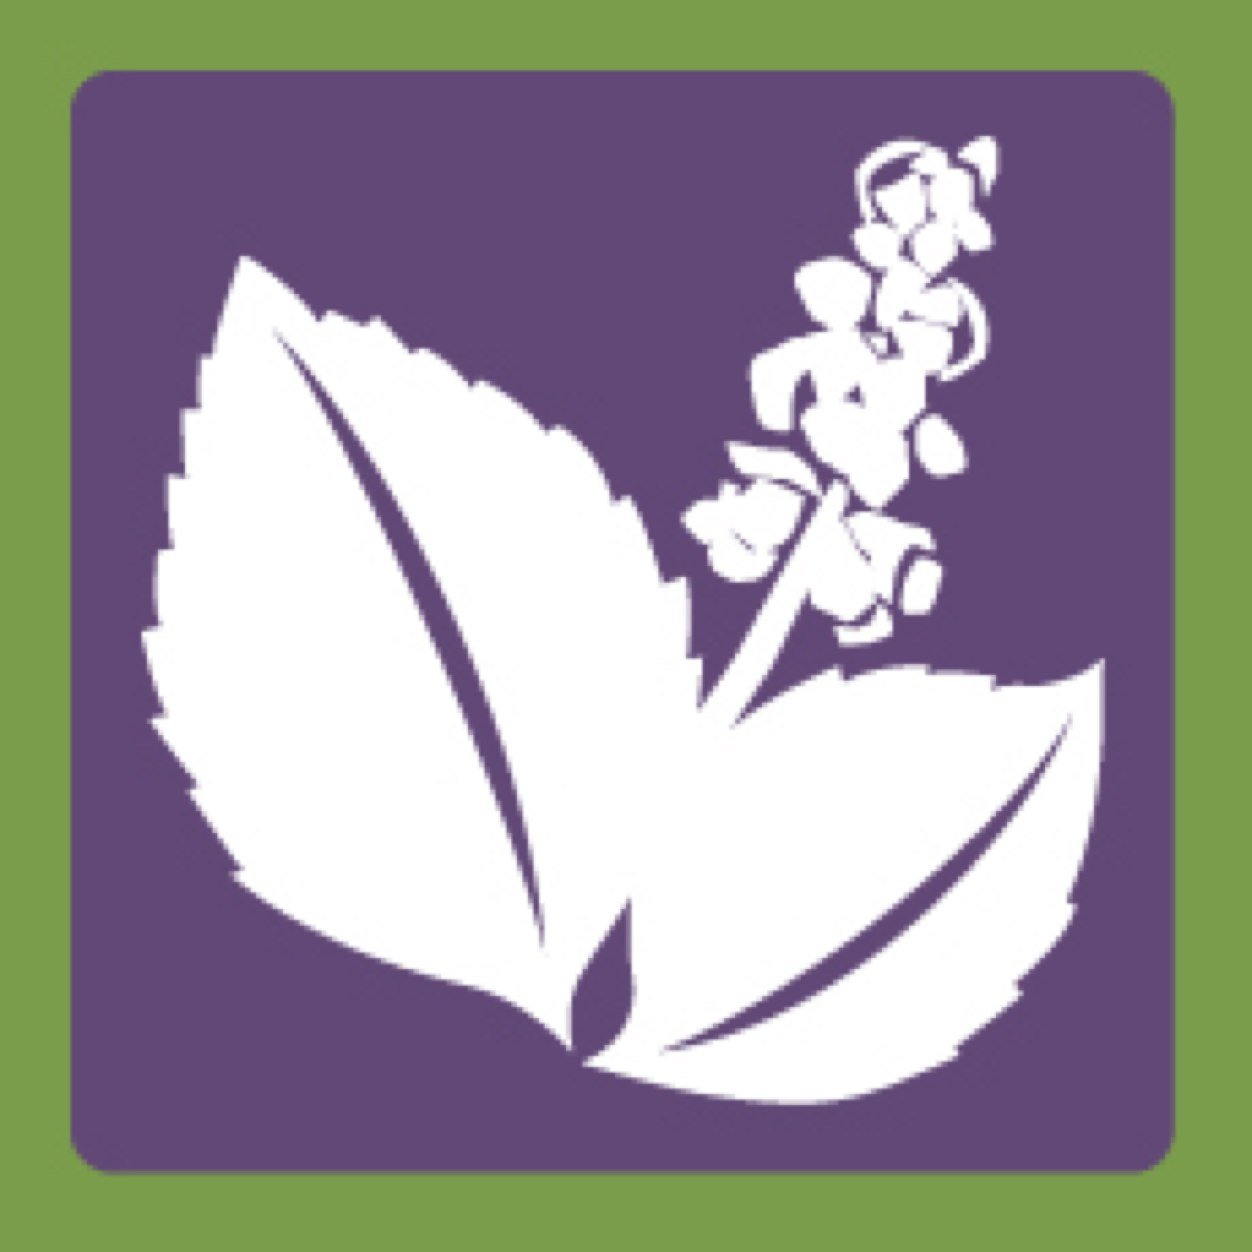 The National Ayurvedic Medical Association represents the Ayurvedic profession in the United States.